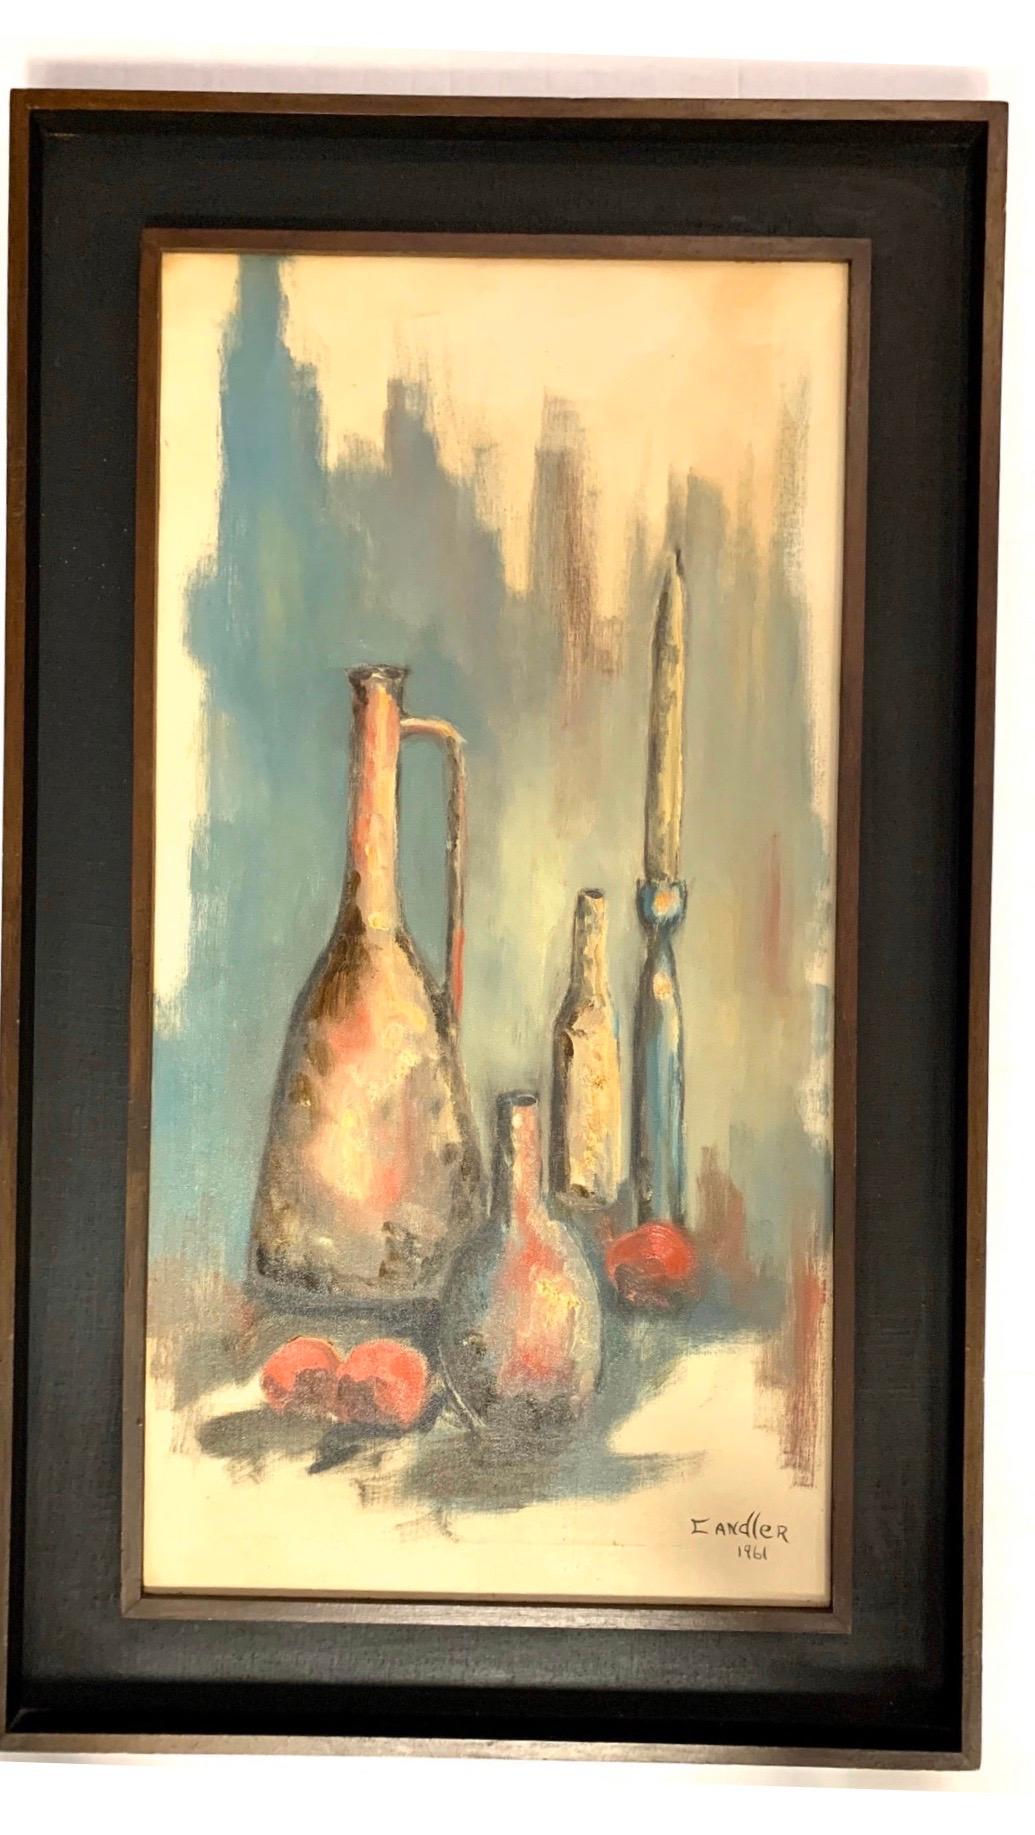 Vintage, 1961 original oil painting by the artist C. Andler, signed on bottom. Medium is oil on canvas. Elegant depiction of a group of bottles and tall flasks displayed in a brown frame.
  